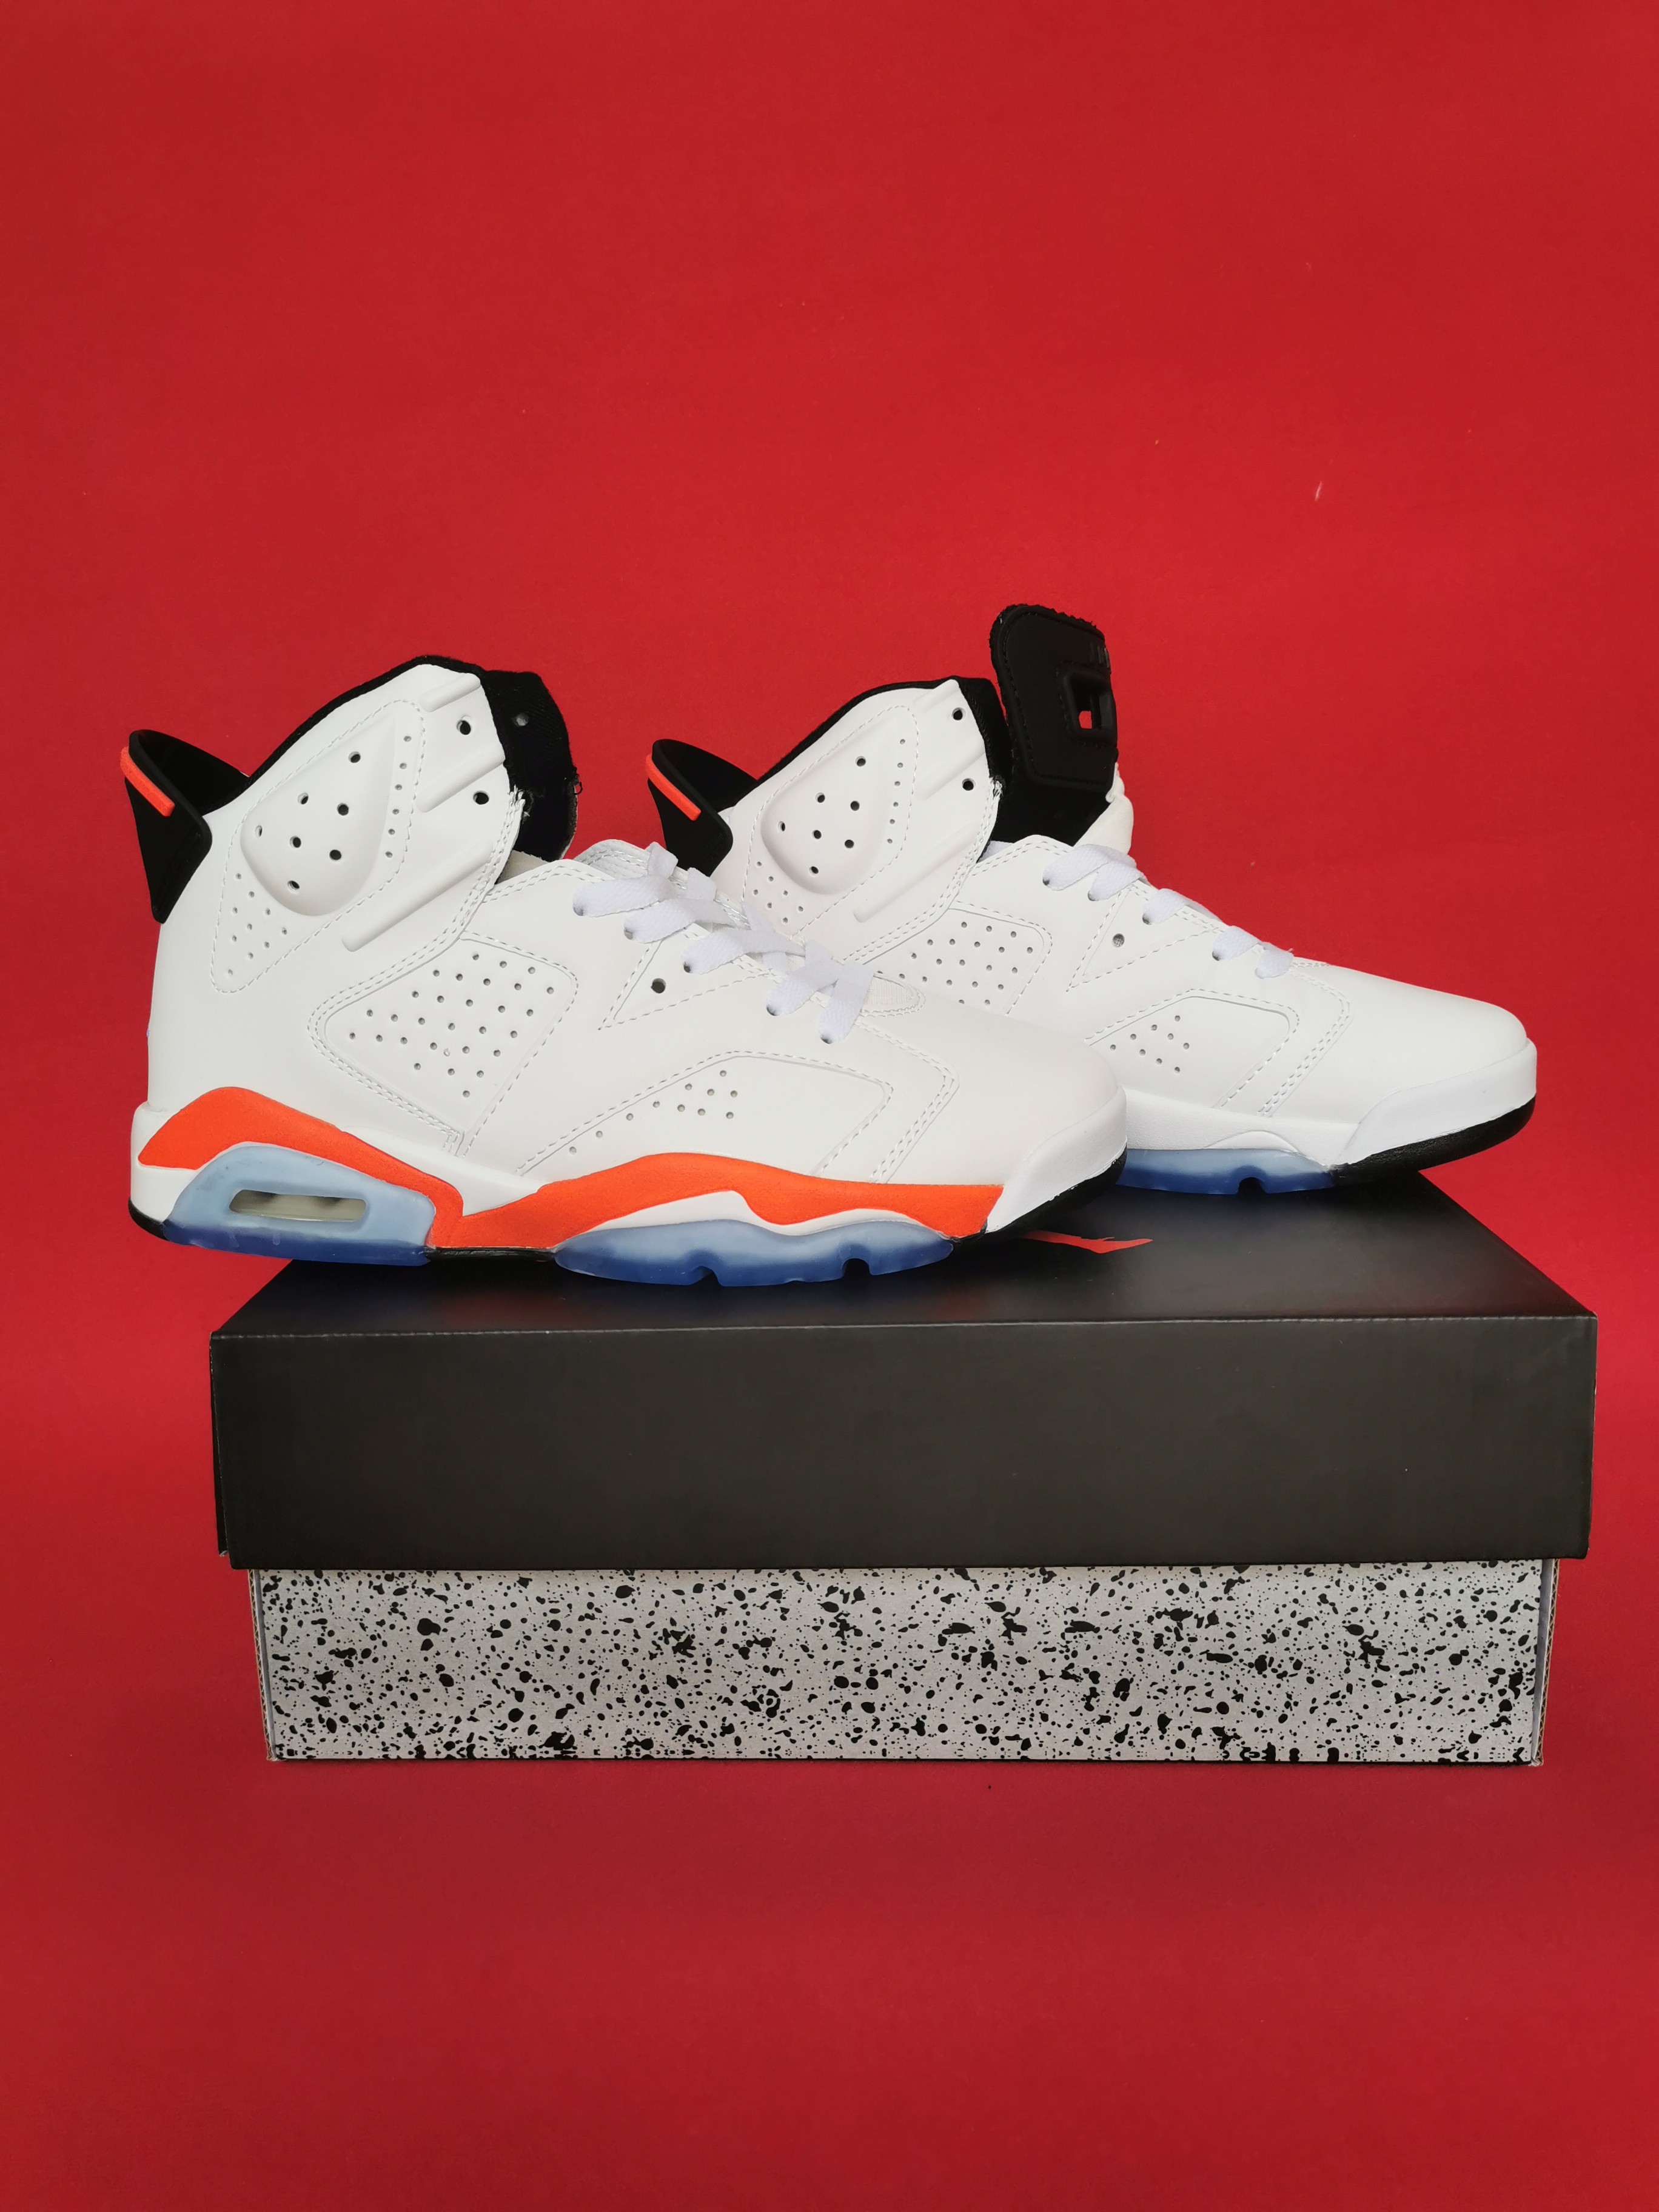 2021 Air Jordan 6 Retro White Red Ice Sole Shoes